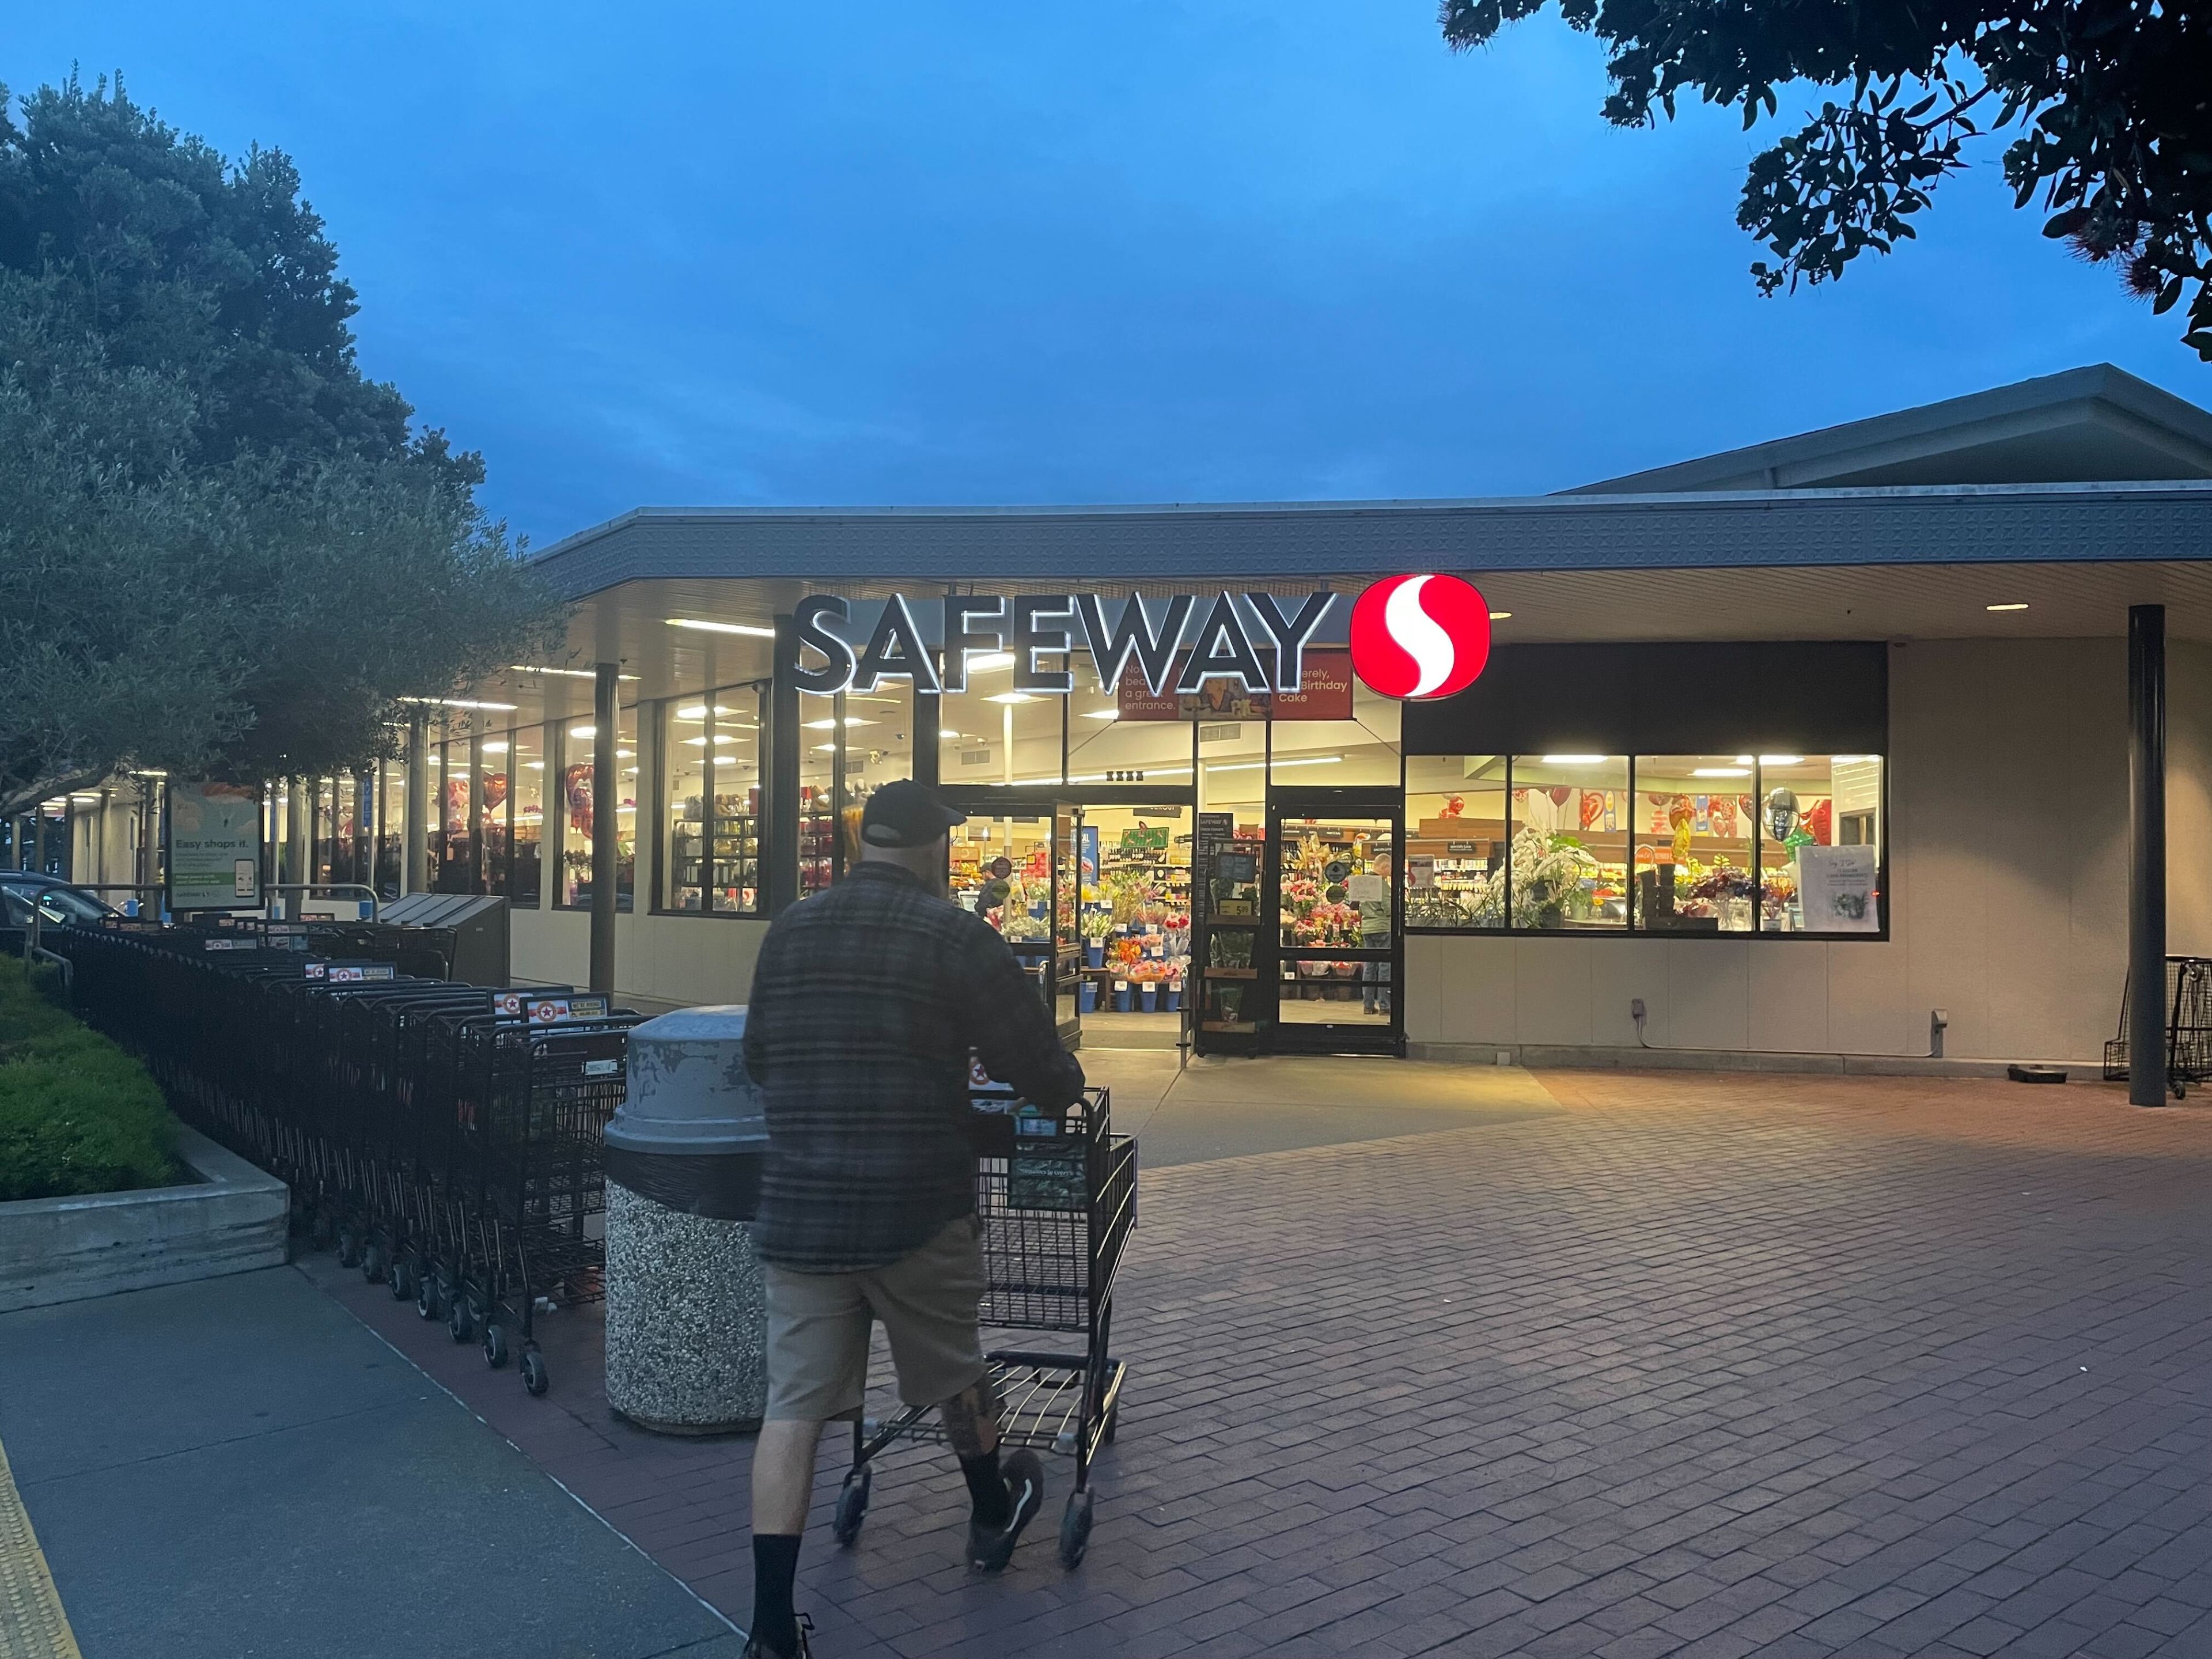 A person pushes a cart towards a Safeway grocery store at dusk, with shopping carts and bright store lights visible.